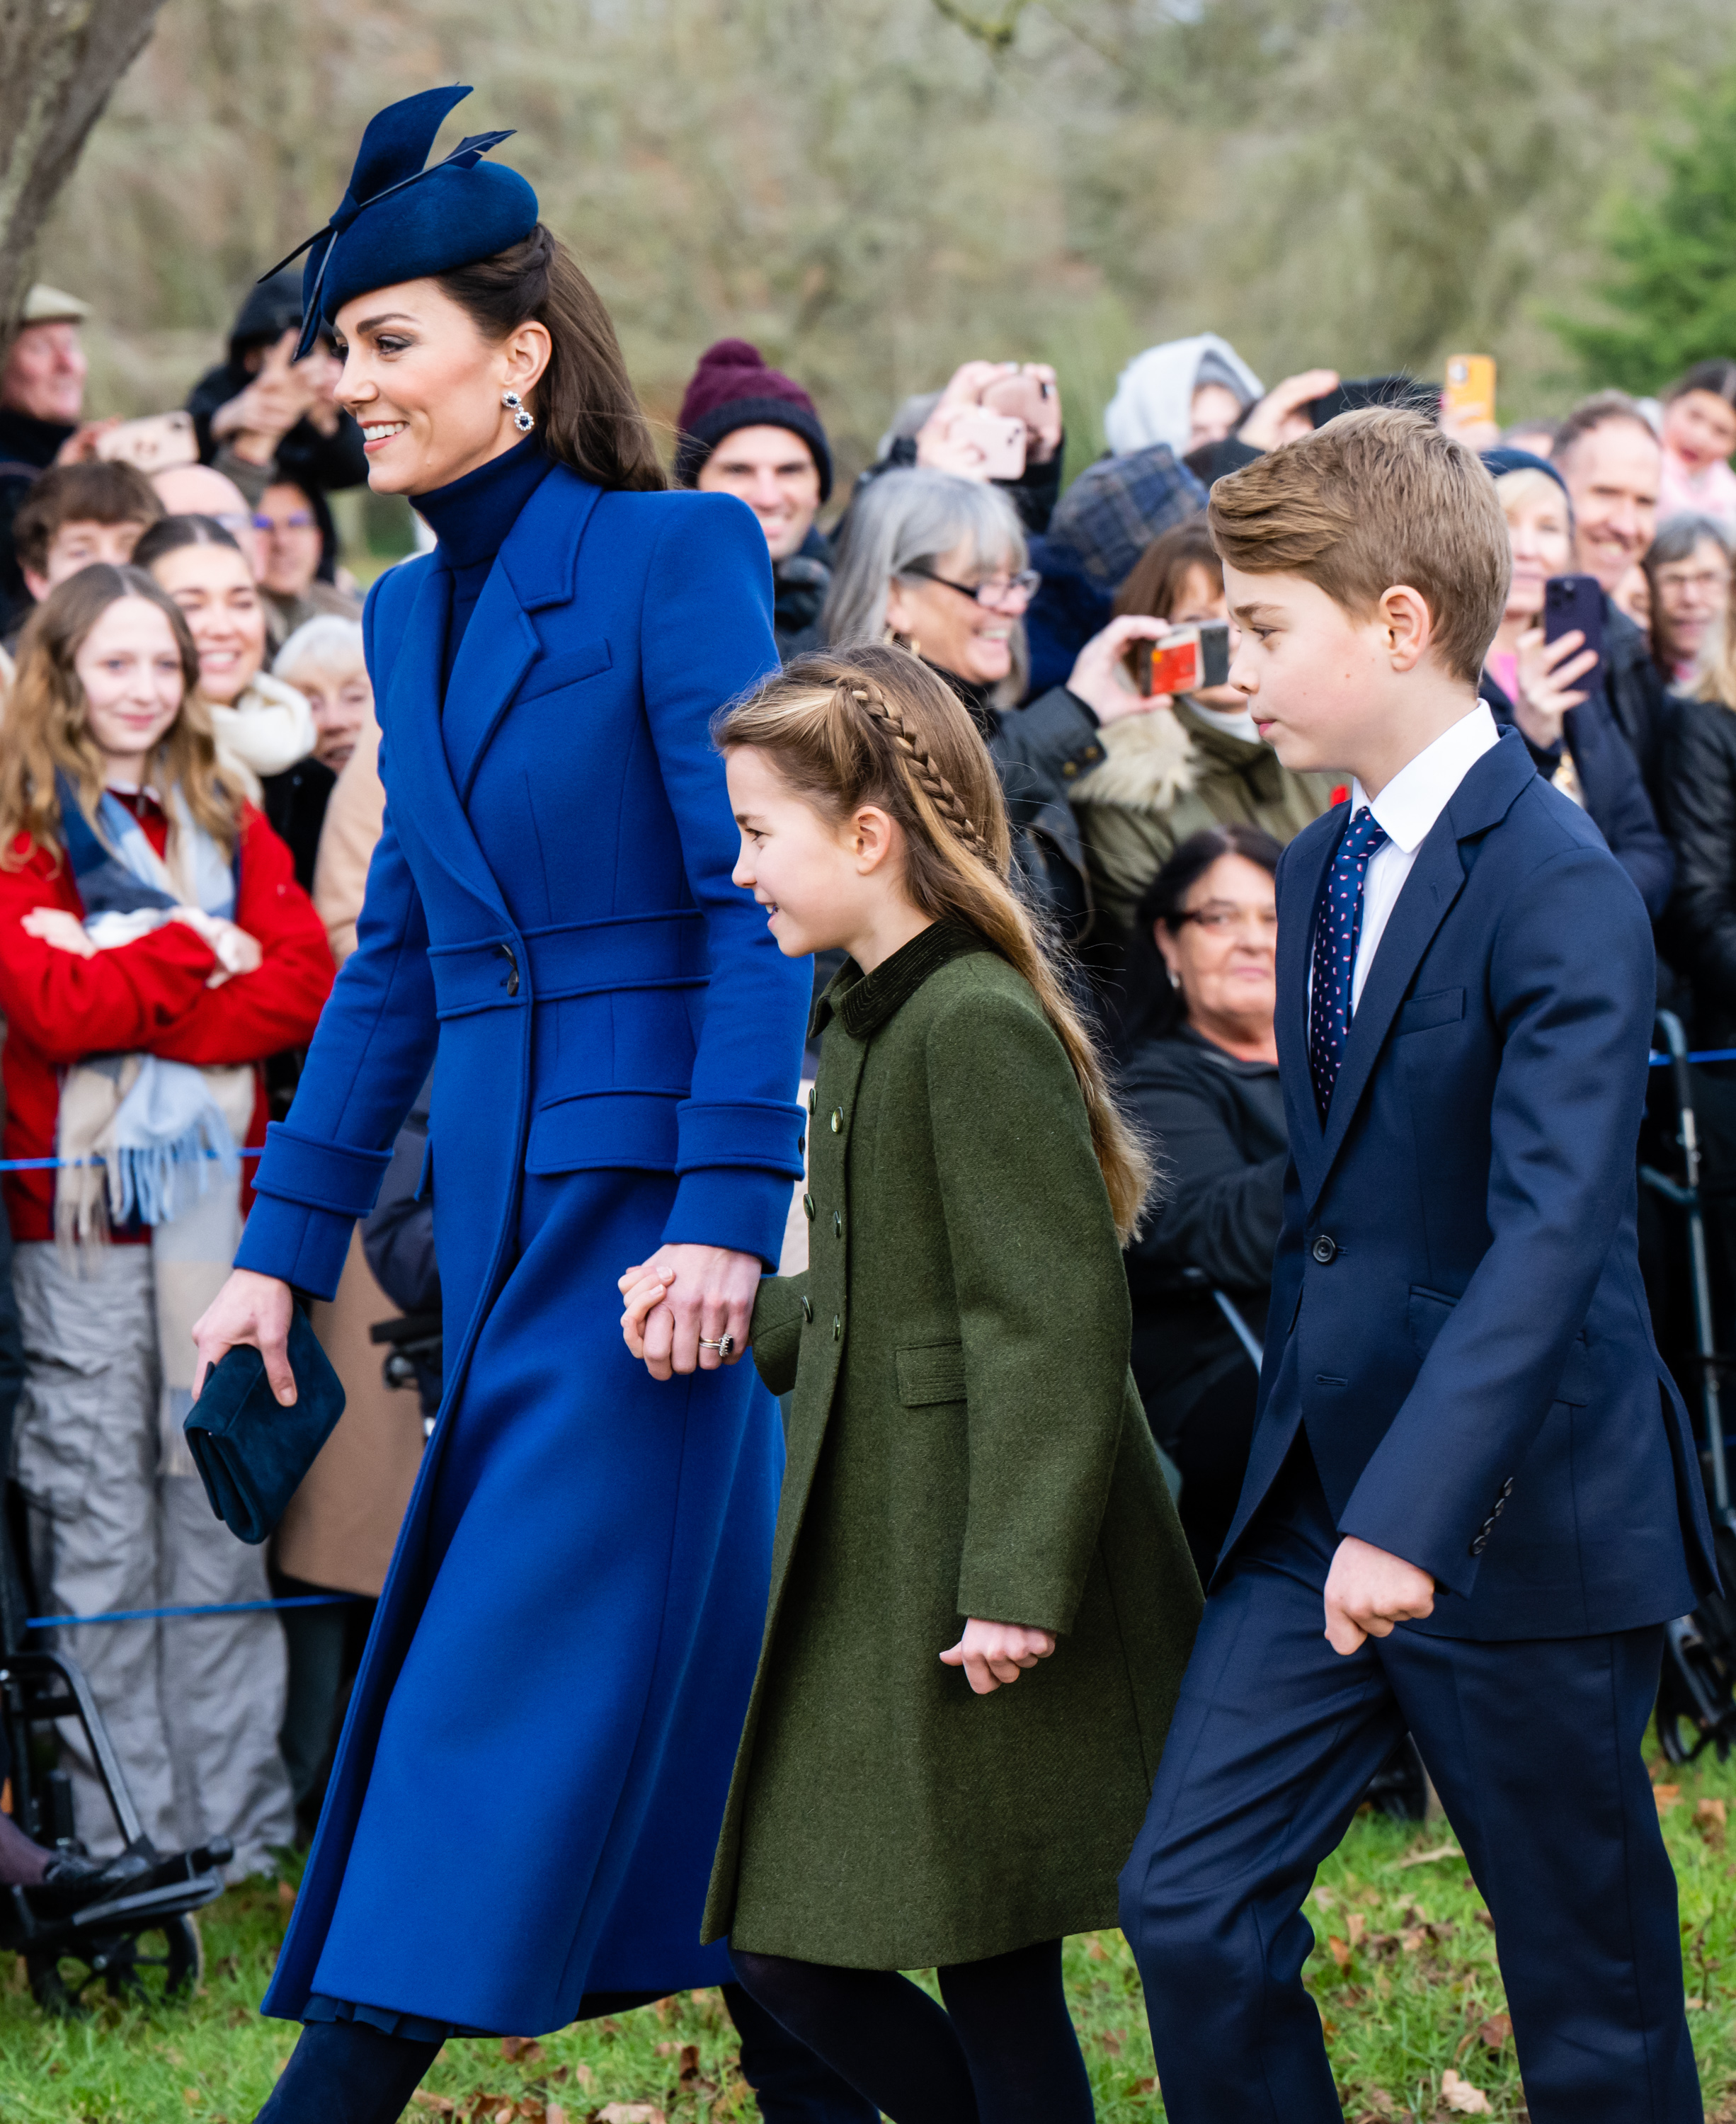 Kate walking with two of her children, George and Charlotte, among a crowd, all dressed in winter coats